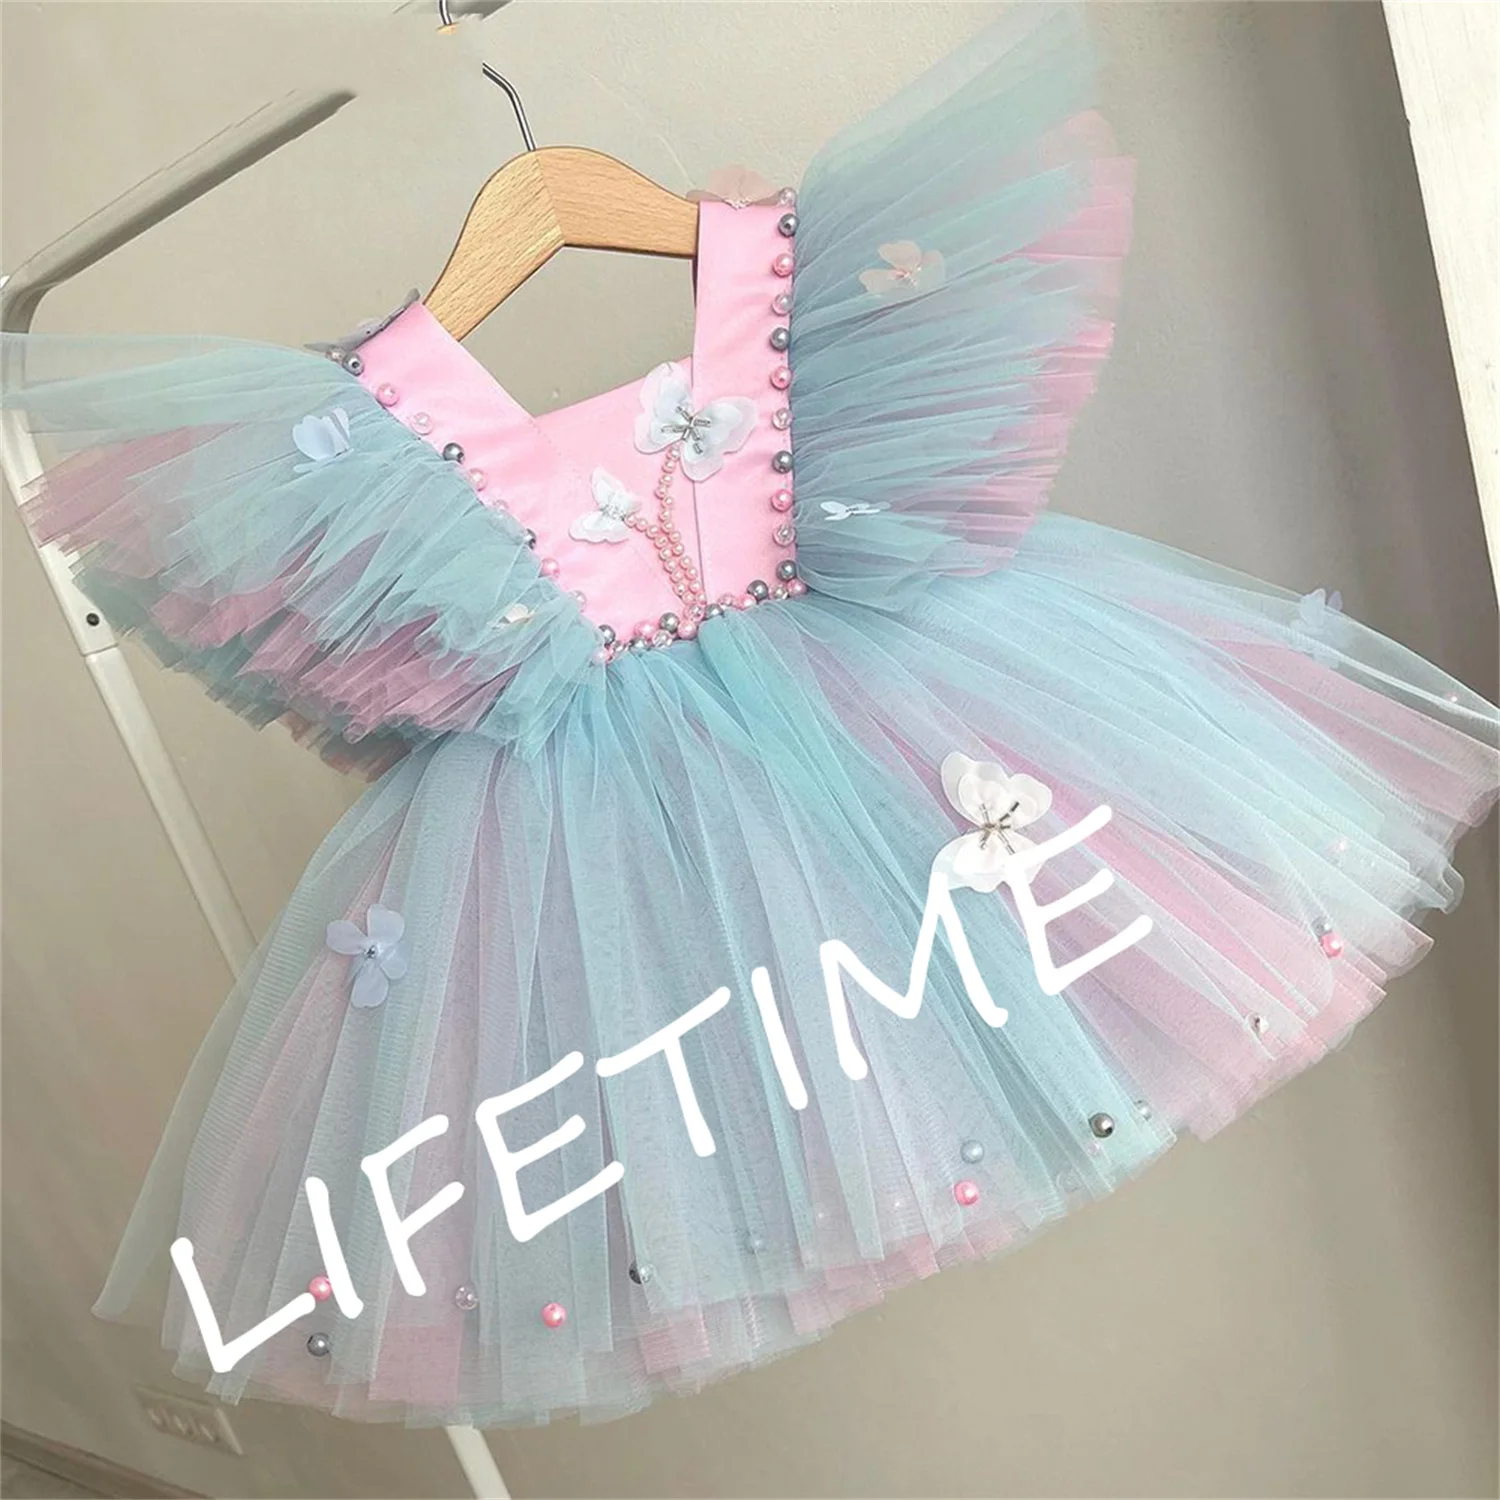 Gardenwed Colorful Party Dresses Child Girl Wedding Dress With Bow Pearls Tulle Puffy Flower Girl Dresses For Weddings